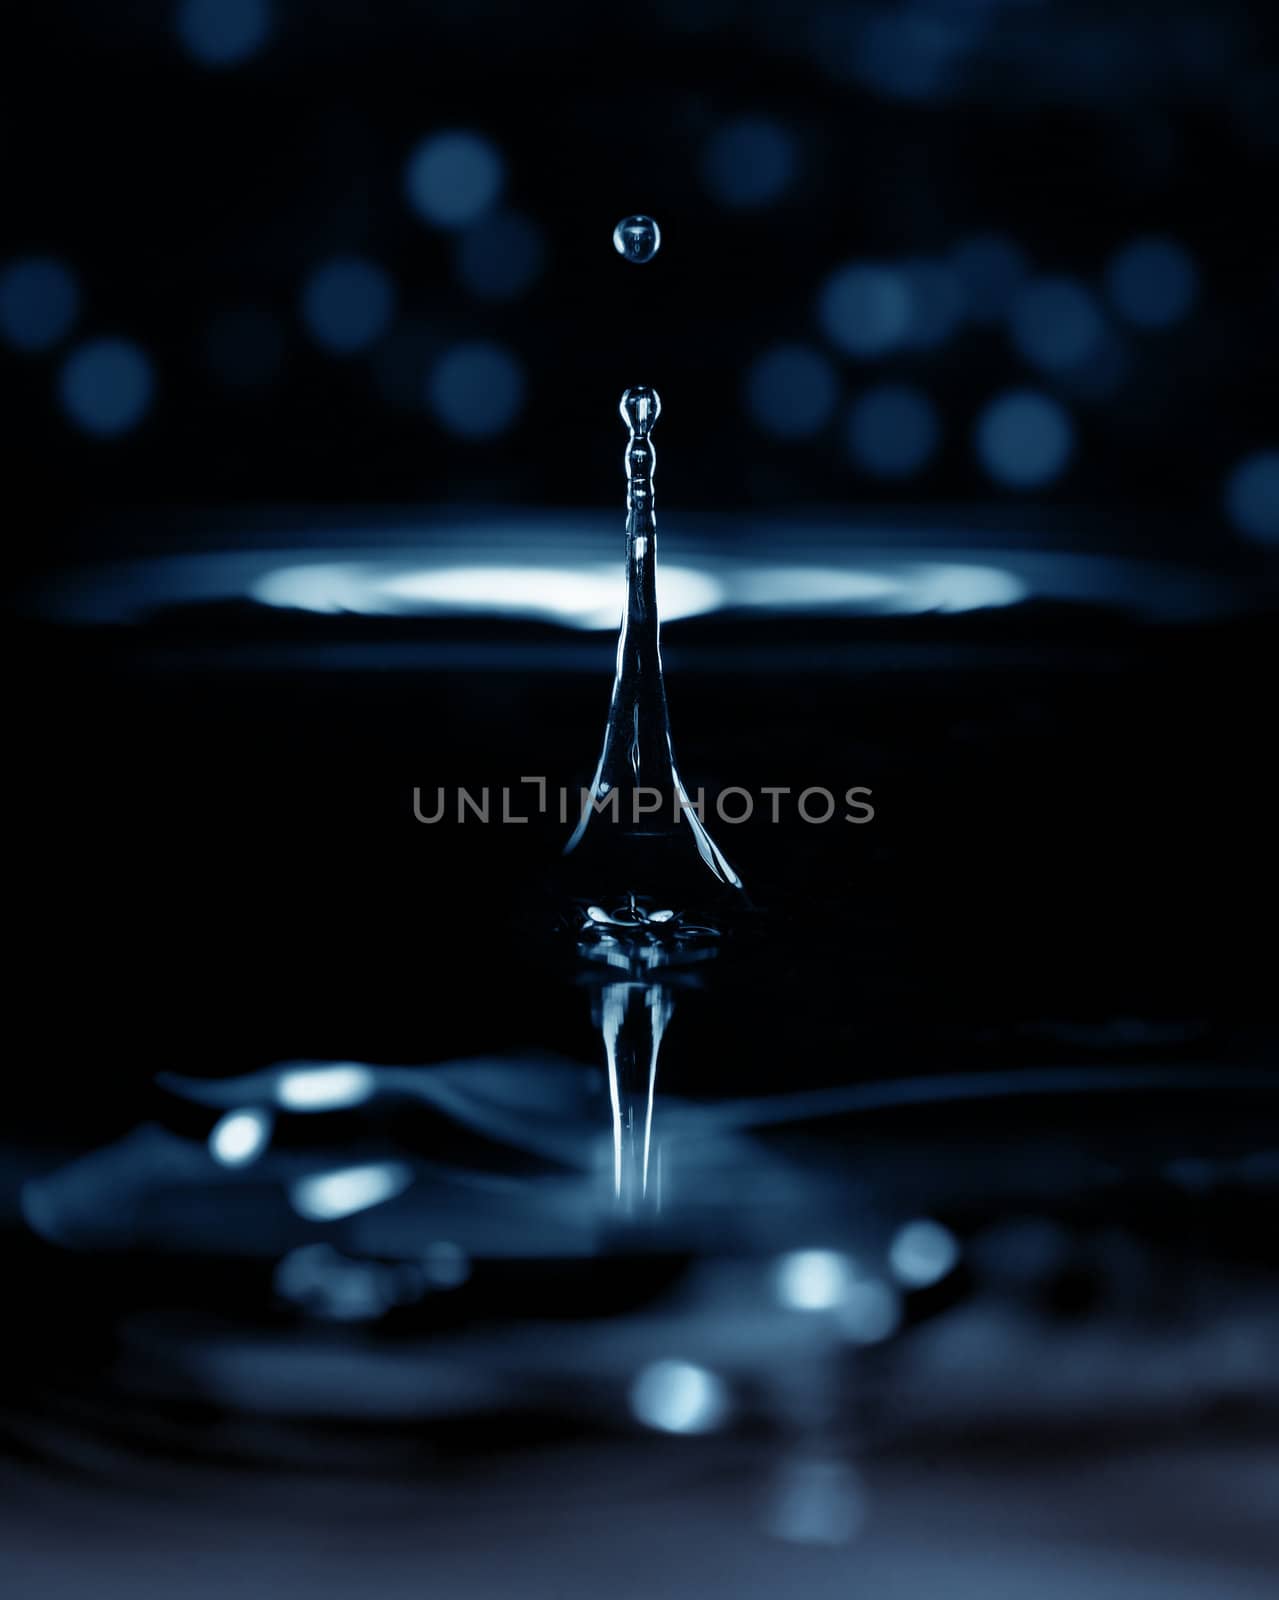 Extremely macro photo of the liquid drop falling on a dark background